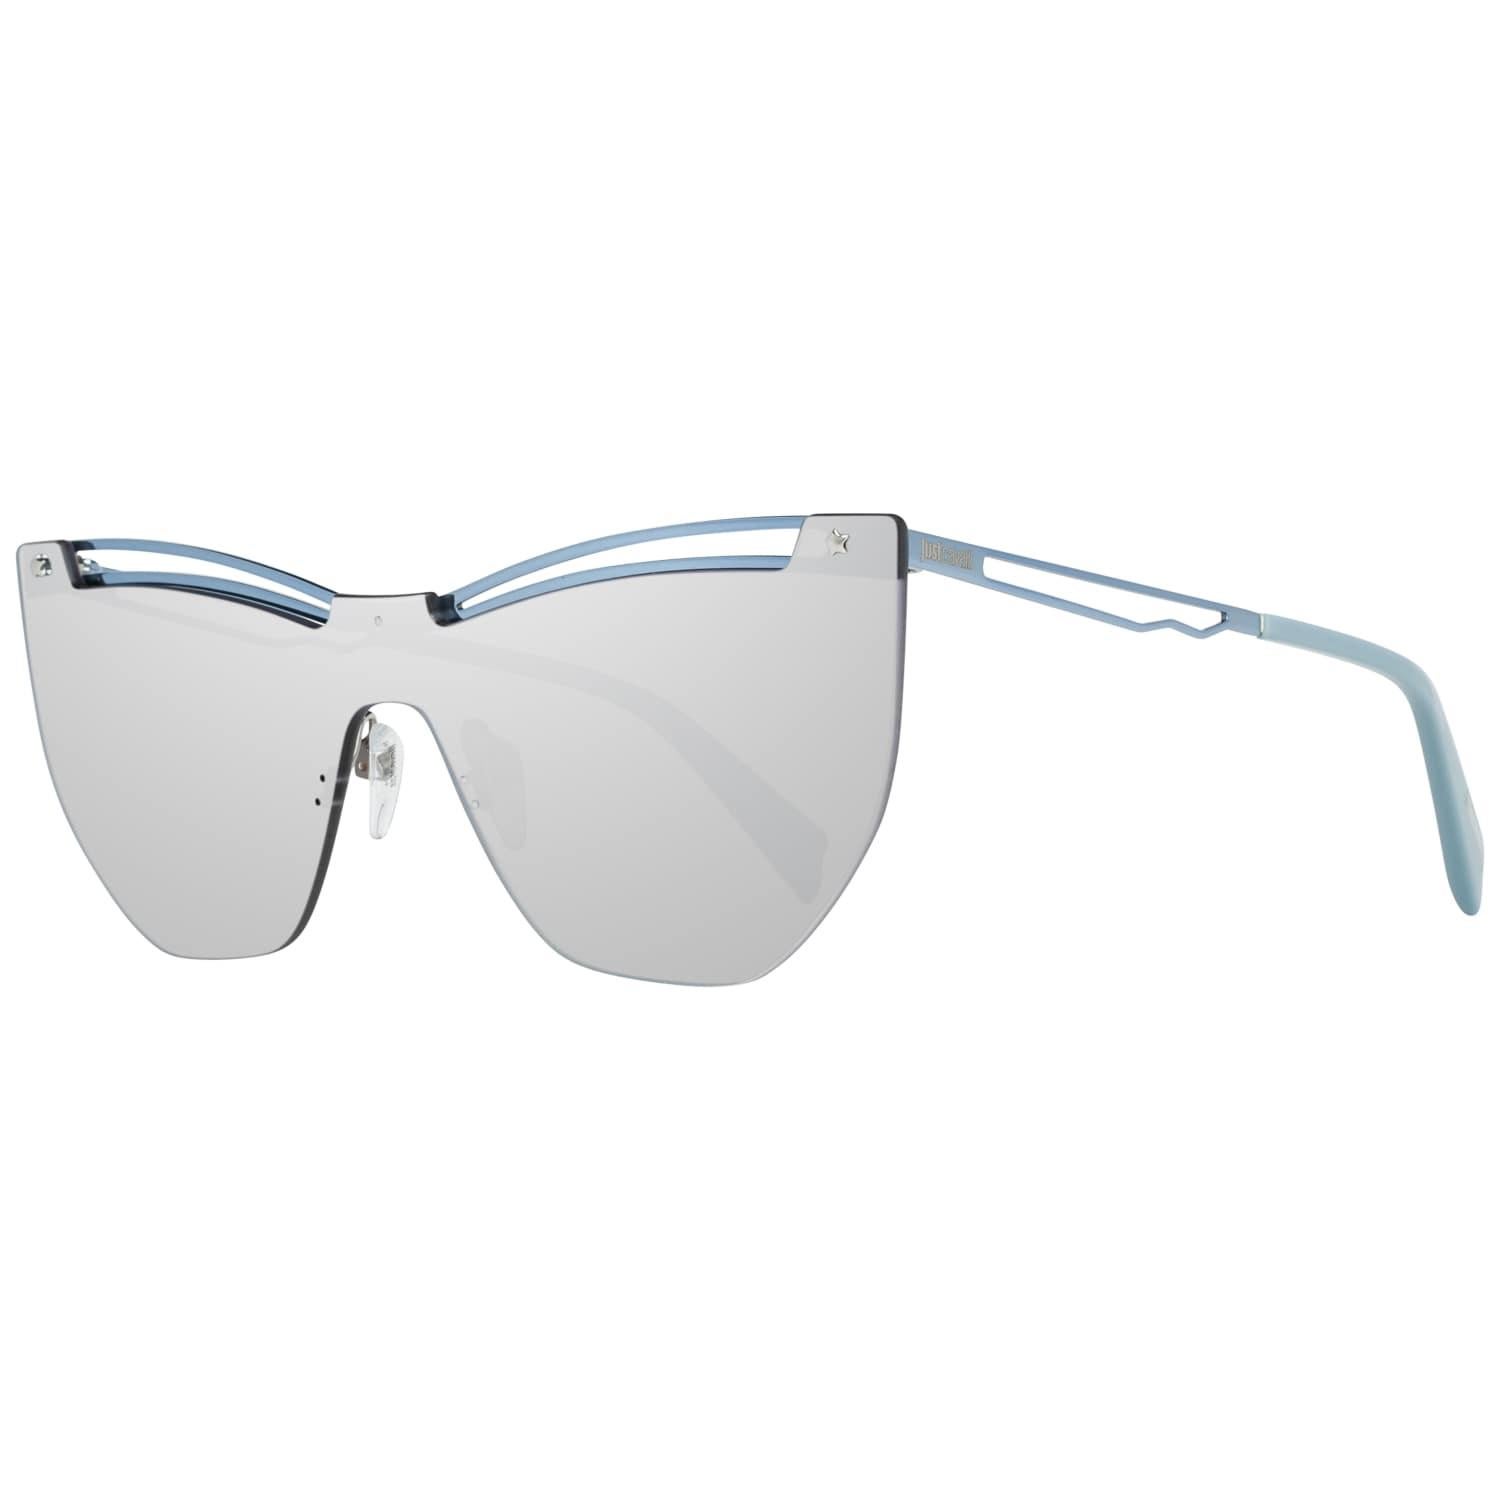 Just Cavalli Mint Women Blue Sunglasses JC841S 13884C 138-138 mm In Excellent Condition In Rome, Rome